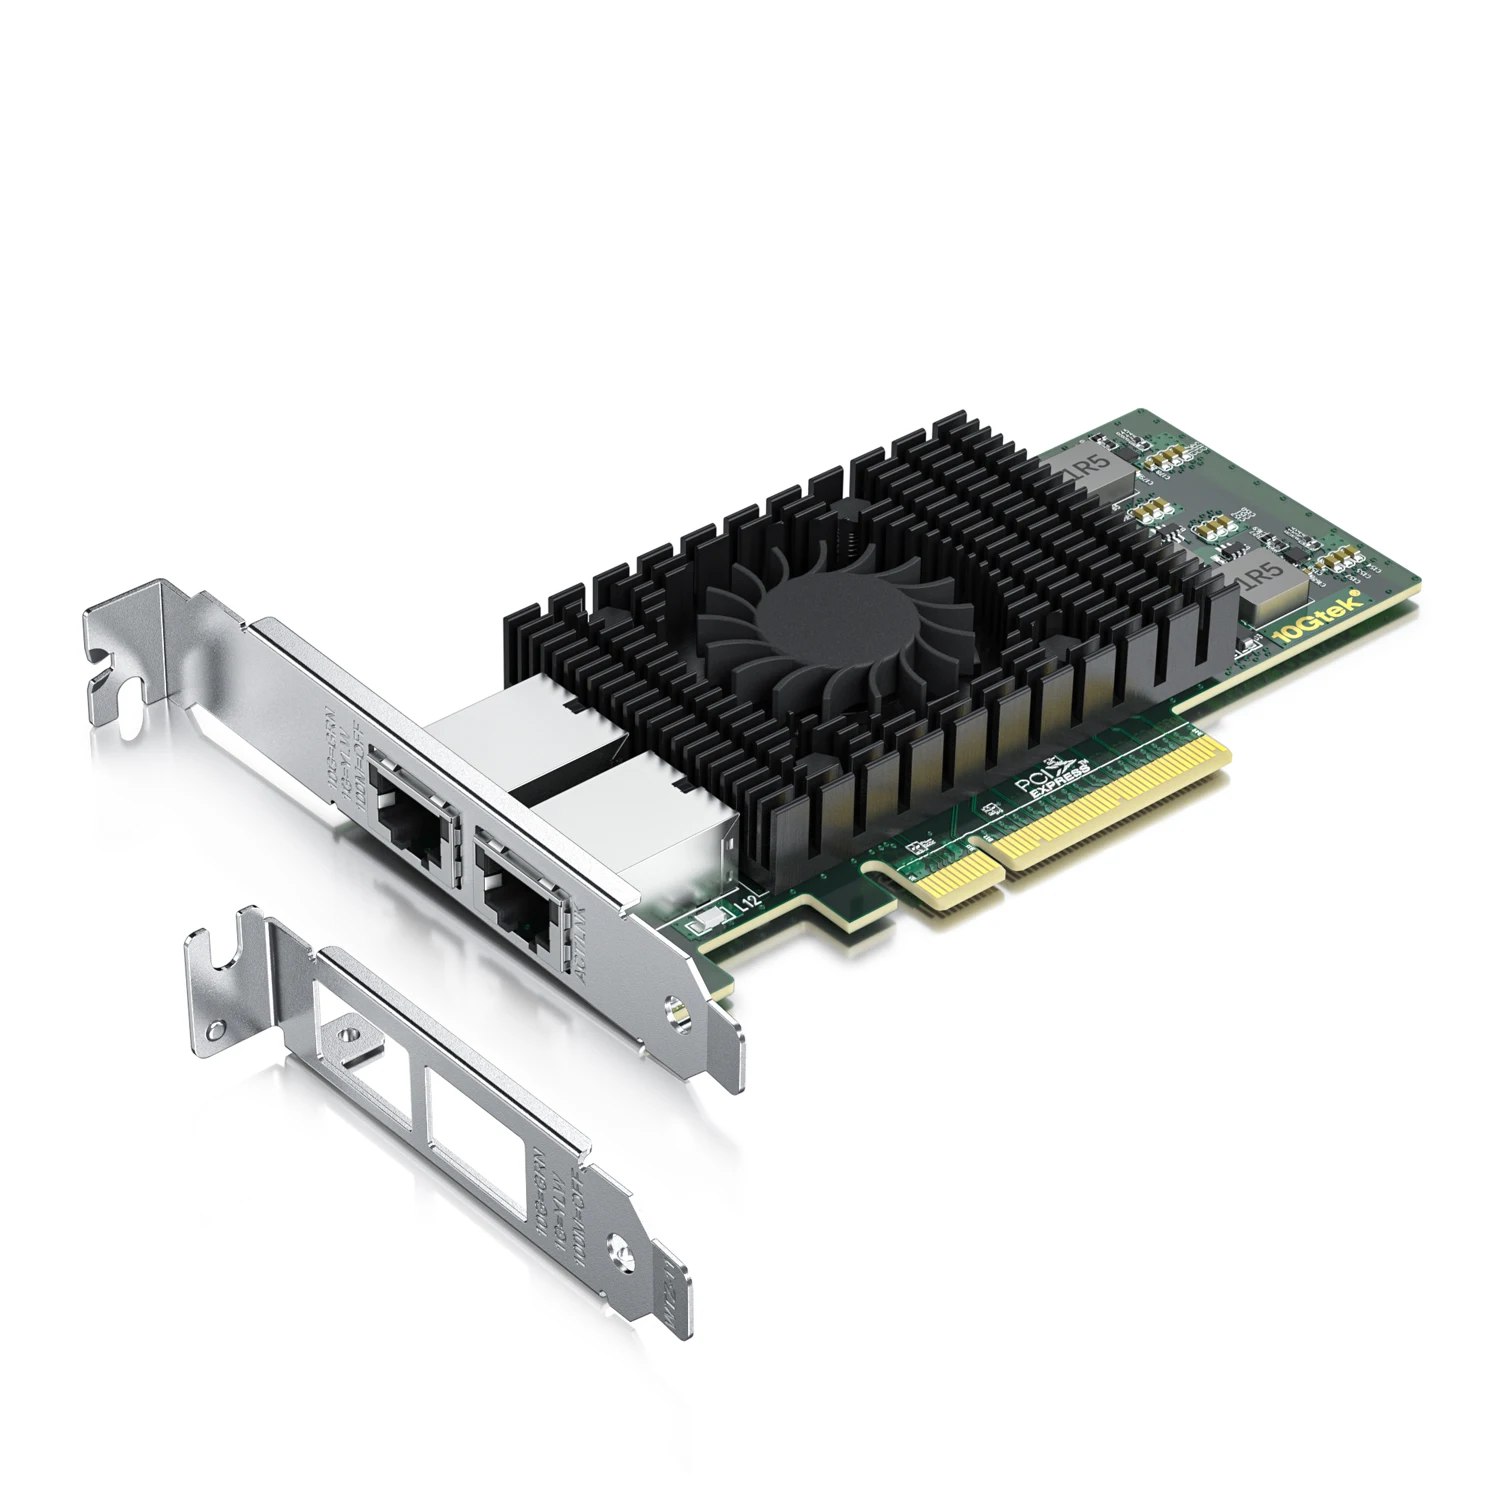 10Gb PCI-E NIC Network Card, PCI Express Ethernet LAN Adapter Support Windows Server/Windows/Linux/ESX, Compare to Intel X540-T2